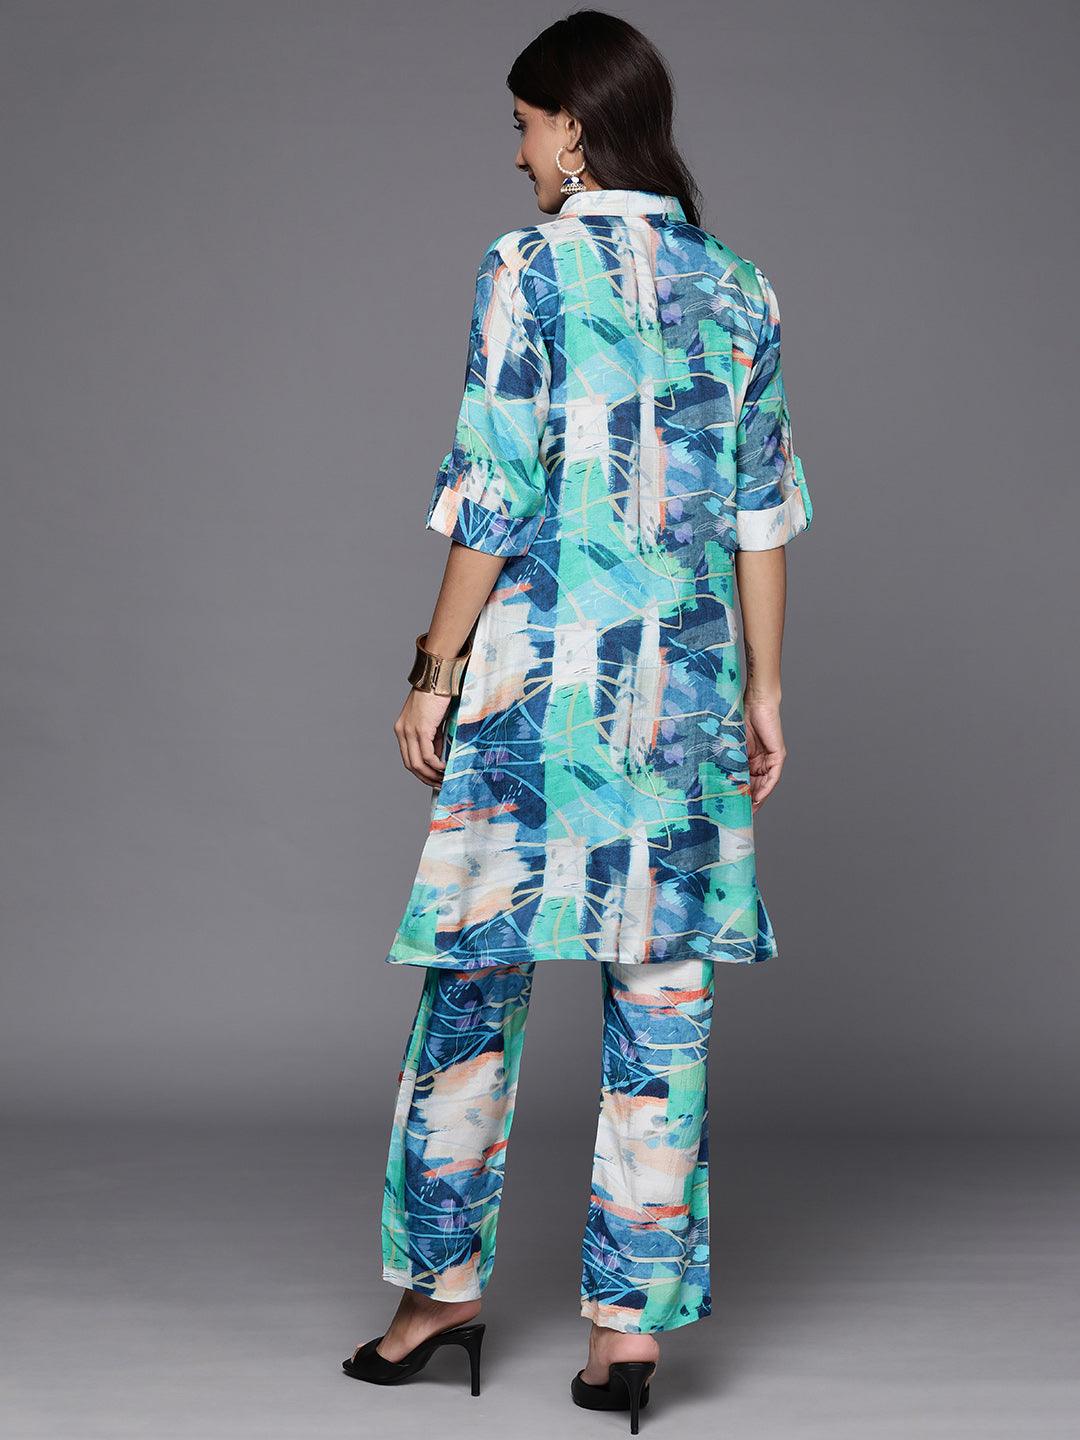 Blue Printed Cotton Blend Tunic With Palazzos - Libas